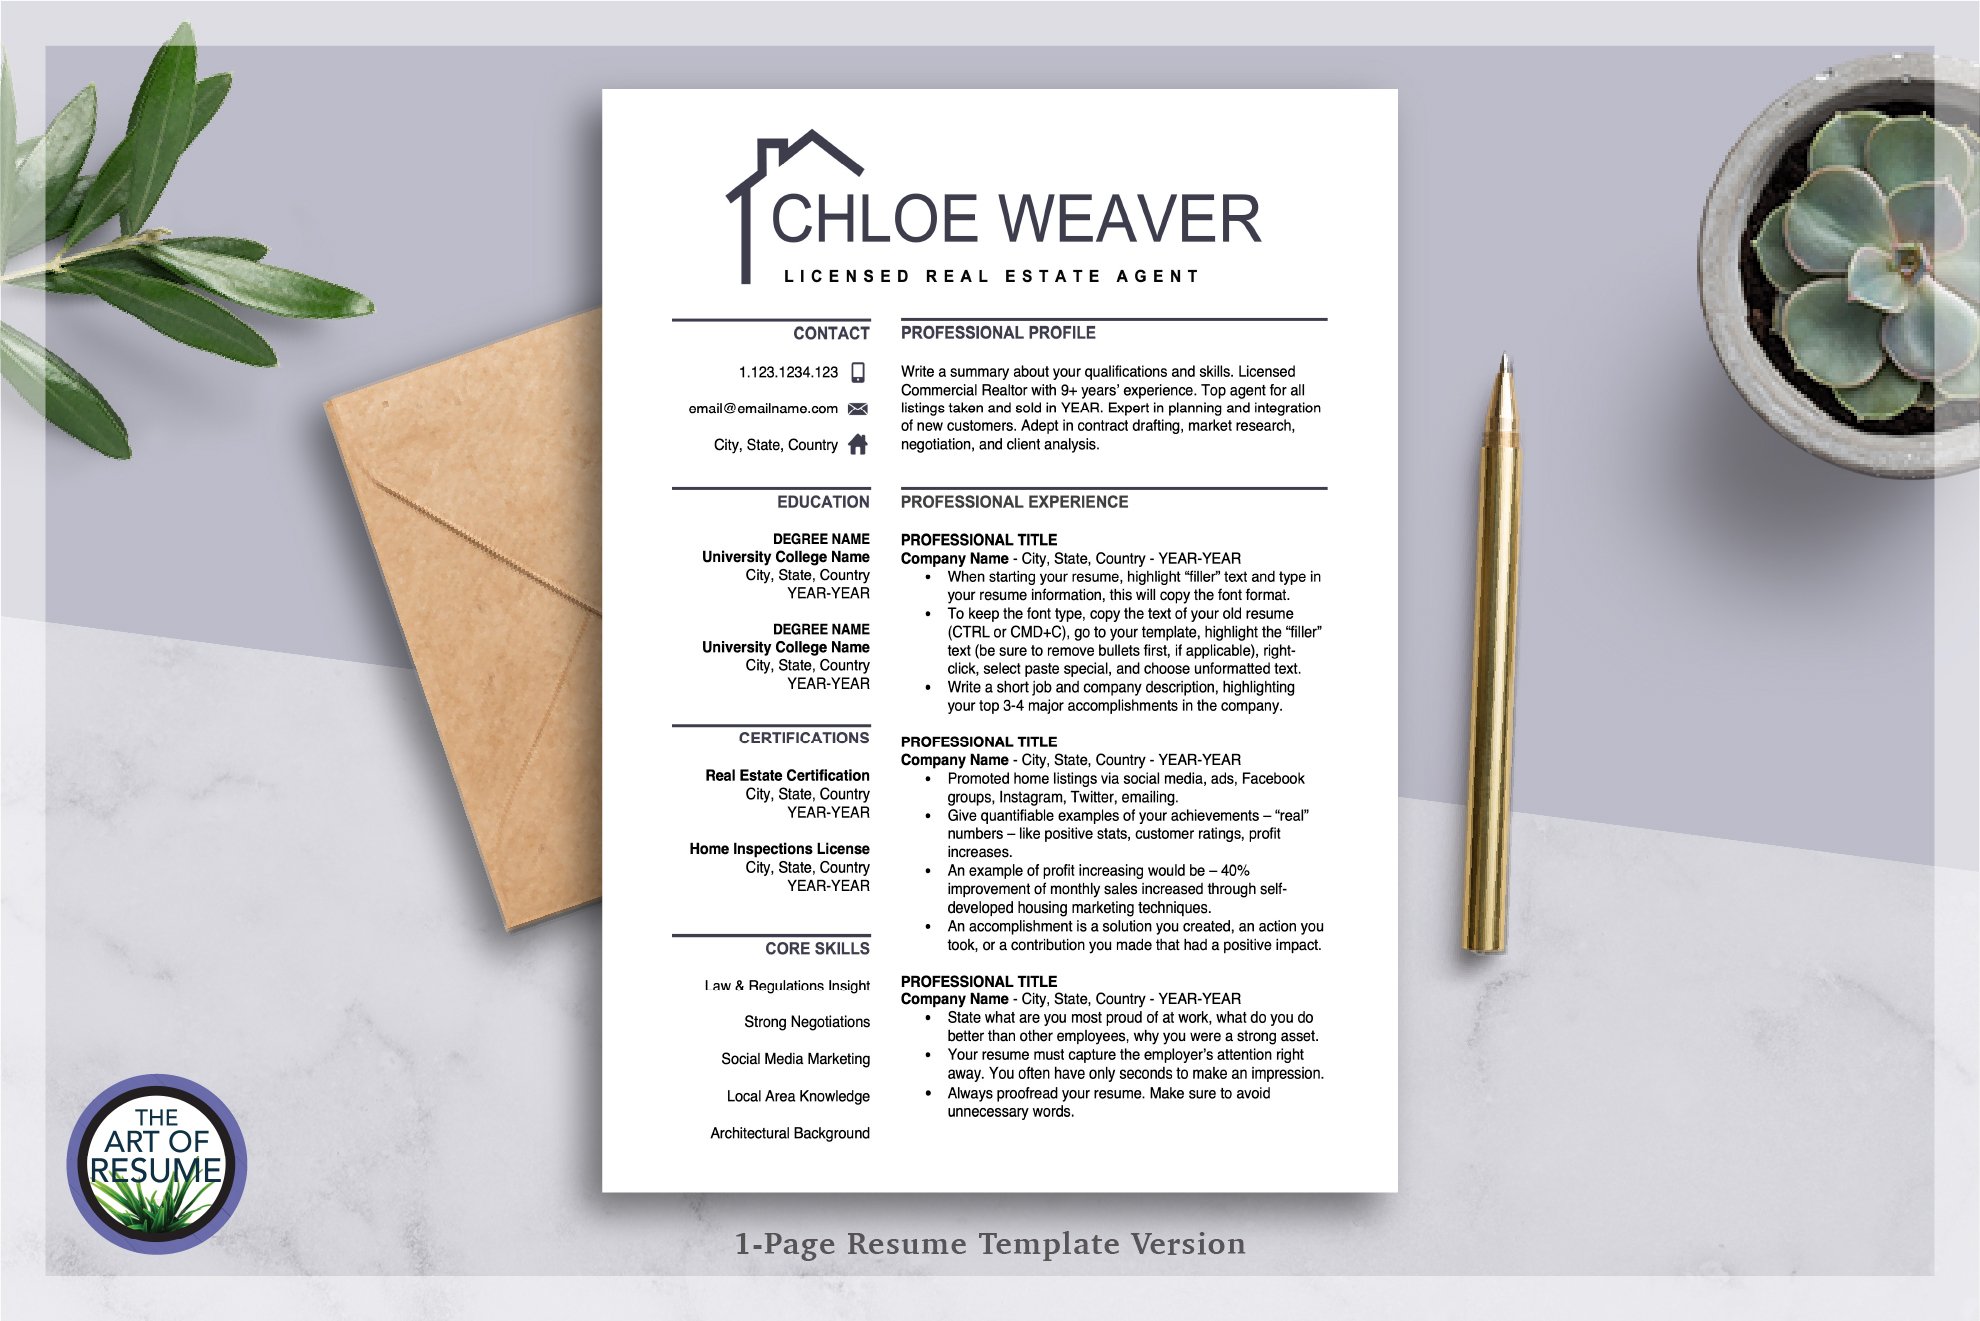 Realtor Resume | Architecture Resume preview image.